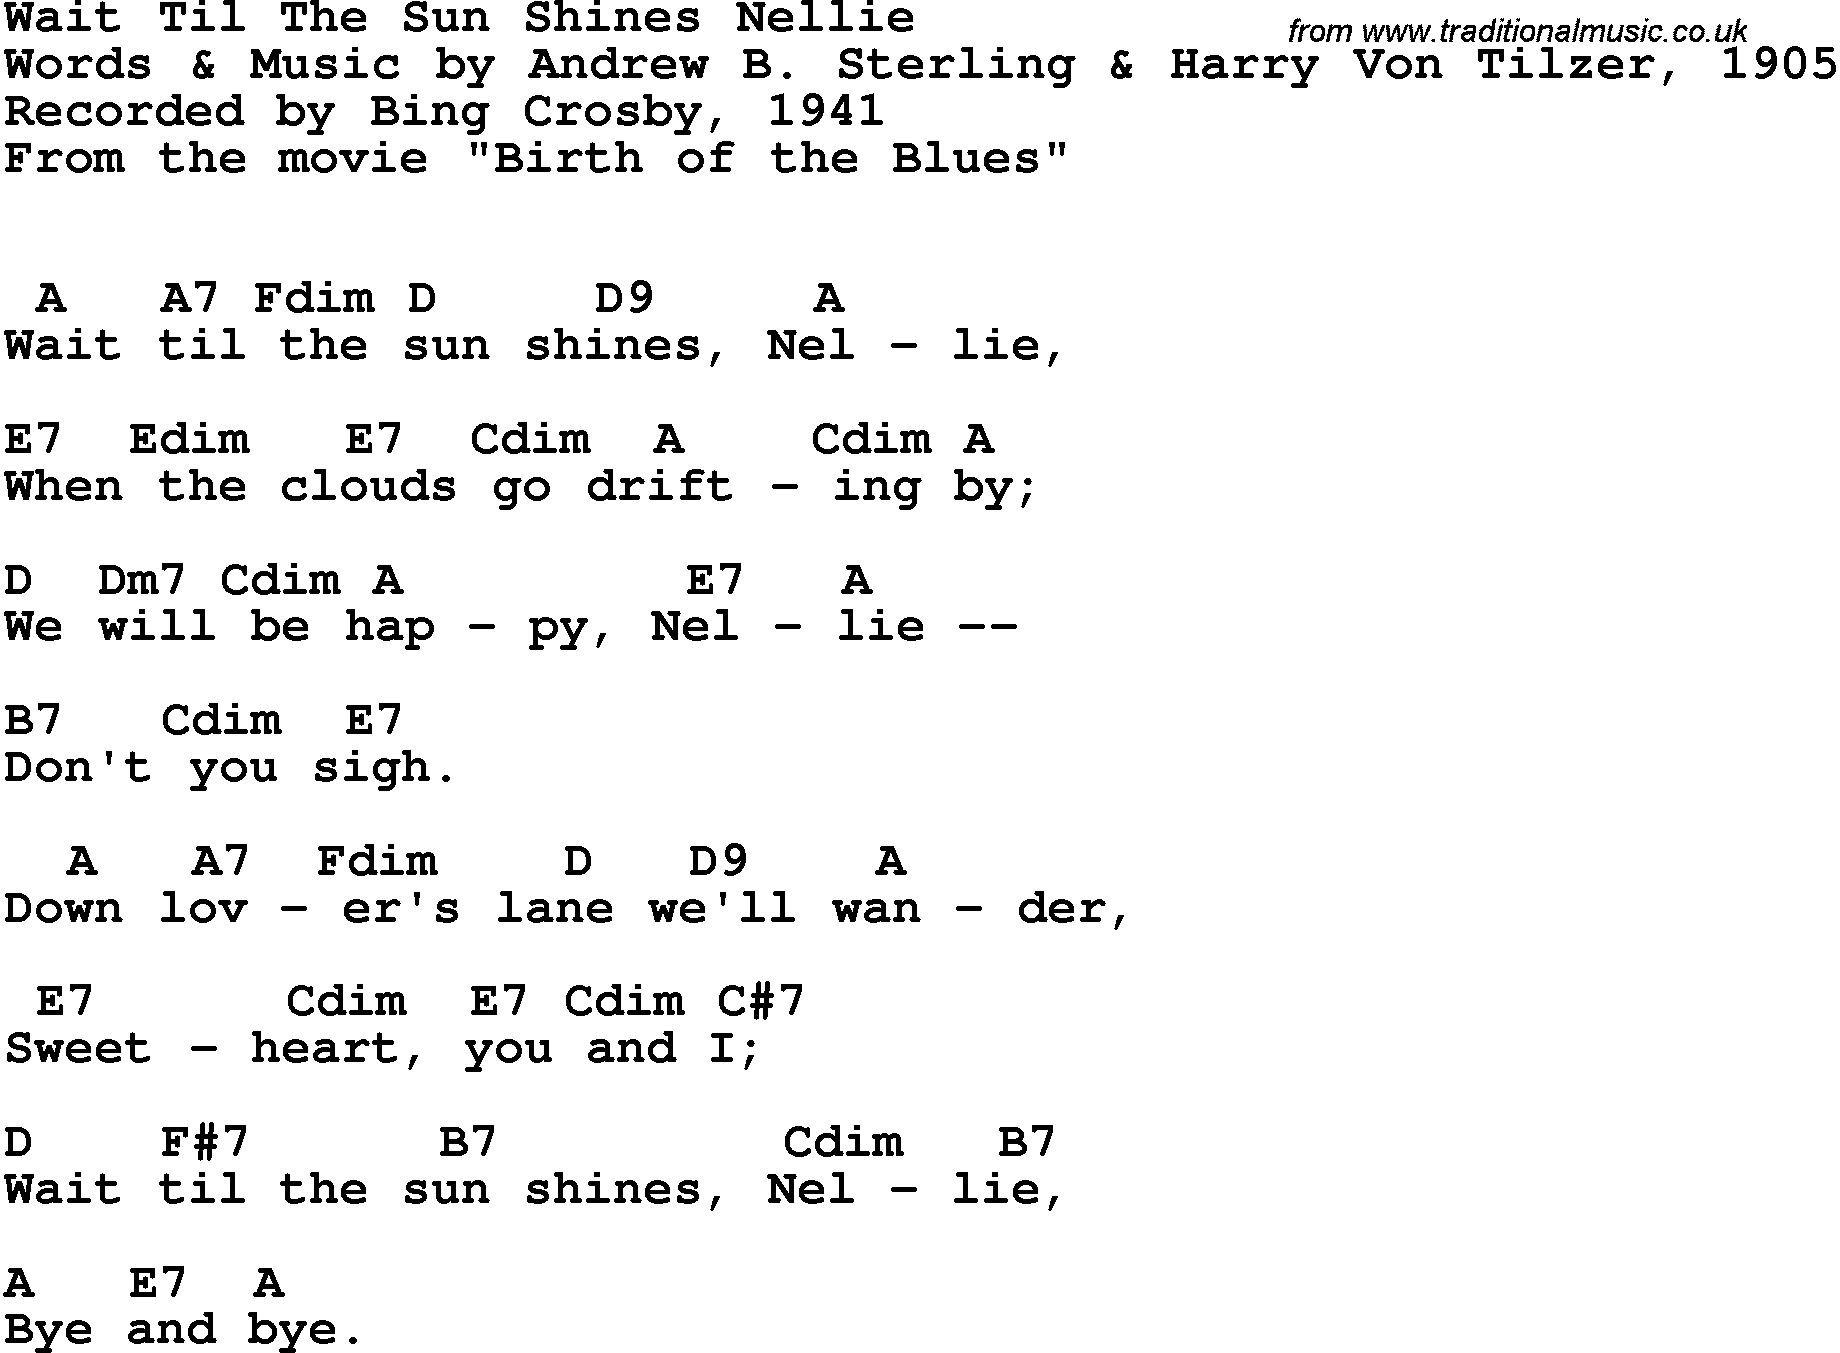 Song Lyrics with guitar chords for Wait Till The Sun Shines, Nellie - Bing Crosby, 1941